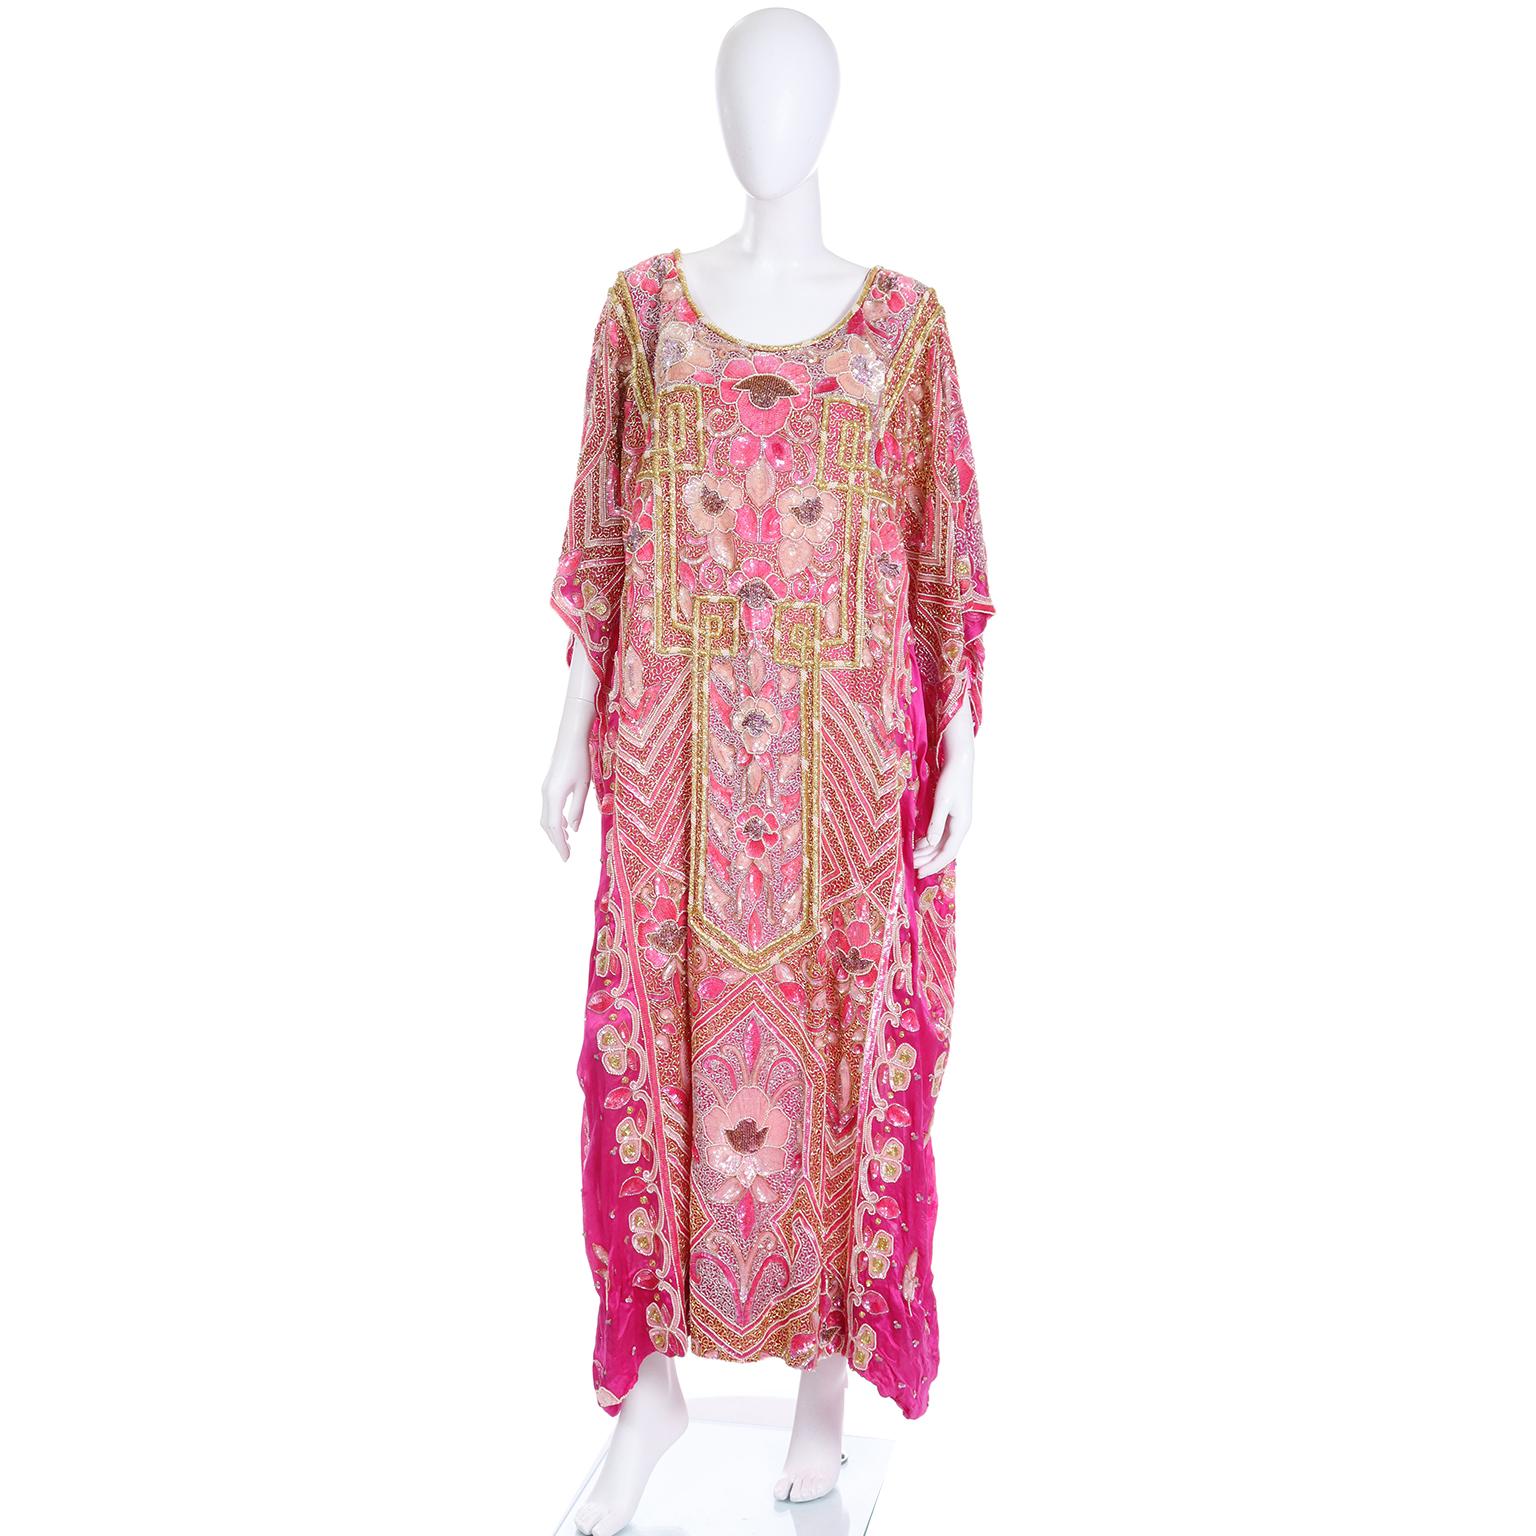 This is a gorgeous vintage caftan that could easily be worn as an evening gown. The base fabric is a vibrant hot pink and the dress is covered in beads and sequins! There are beautiful rows of thick, raised gold beads that add dimension to the